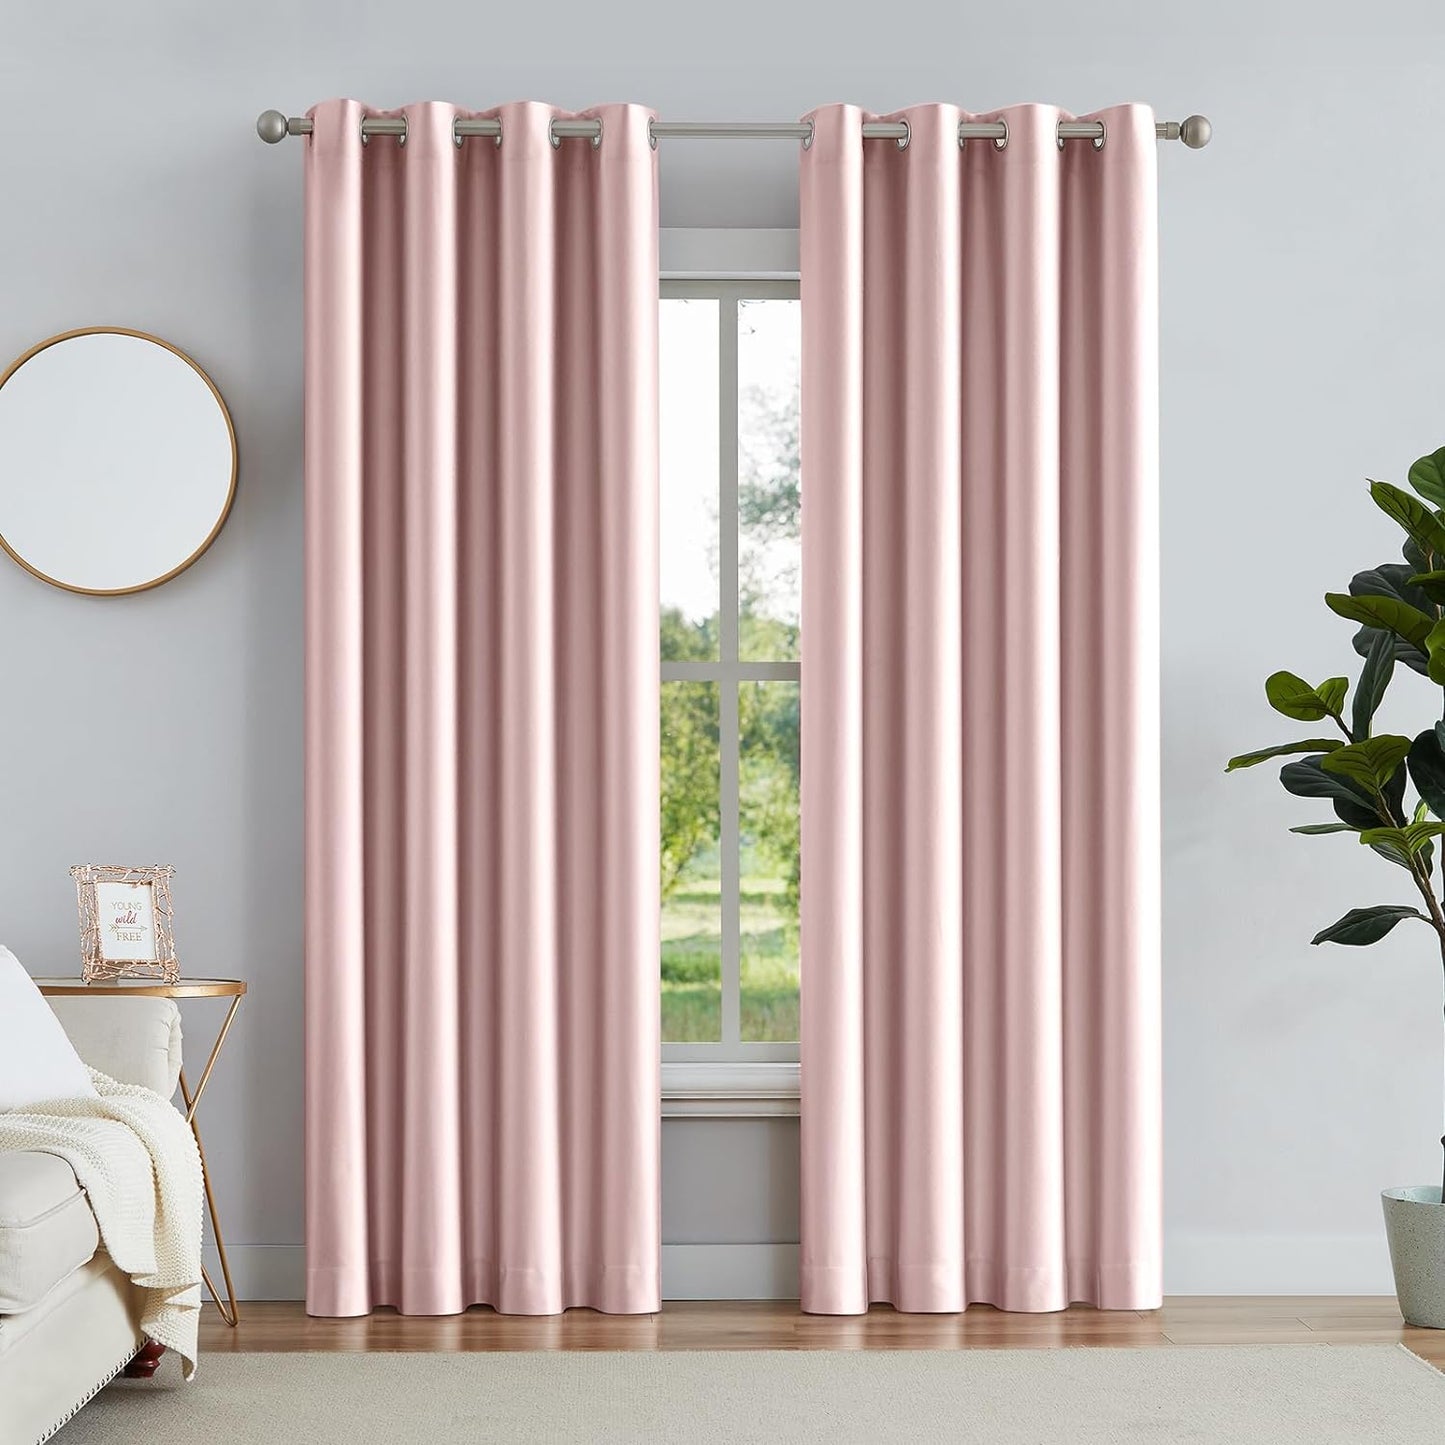 Melodieux Pink Blackout Curtains 84 Inches Long for Bedroom, Thermal Insulated Energy Saving Grommet Embossed Satin Drapes with Black Lining, 52 by 84 Inch, 2 Panels  Melodieux Light Pink 52"W X 63"L 